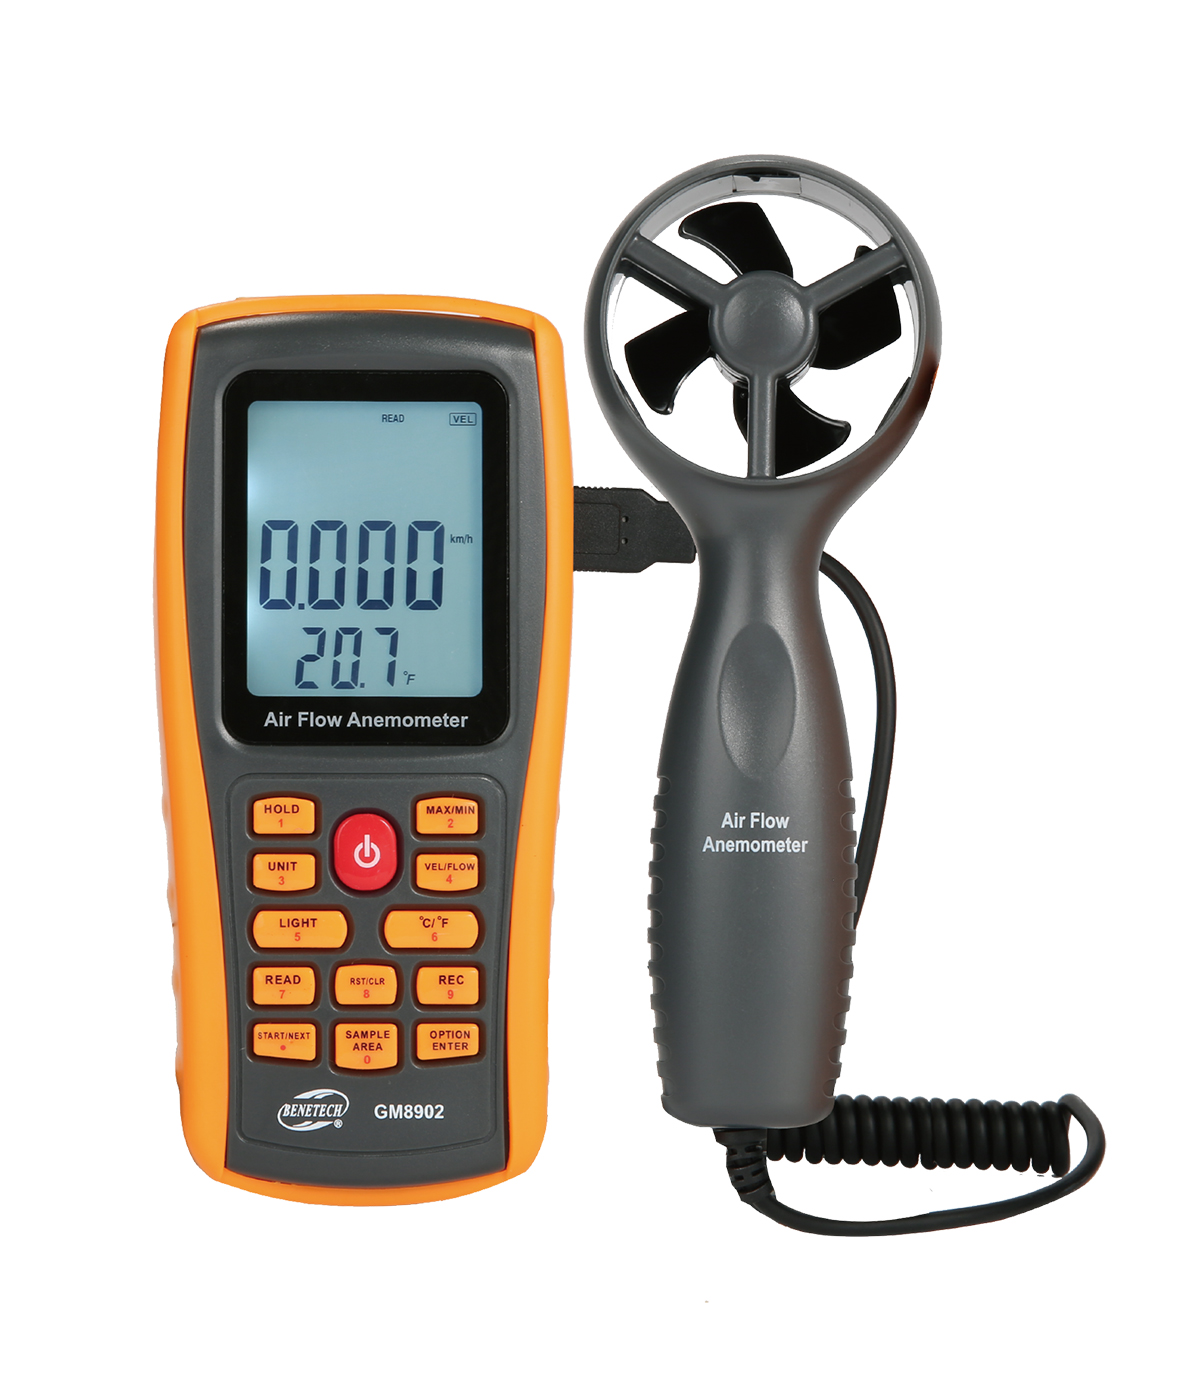 Edition : GM8902 KANJJ-YU Digital Anemometer GM 8902 Wind Speed Air Temperature Measurement High Precision Measurement Easy Compact Portable LCD with Back Light Probe 